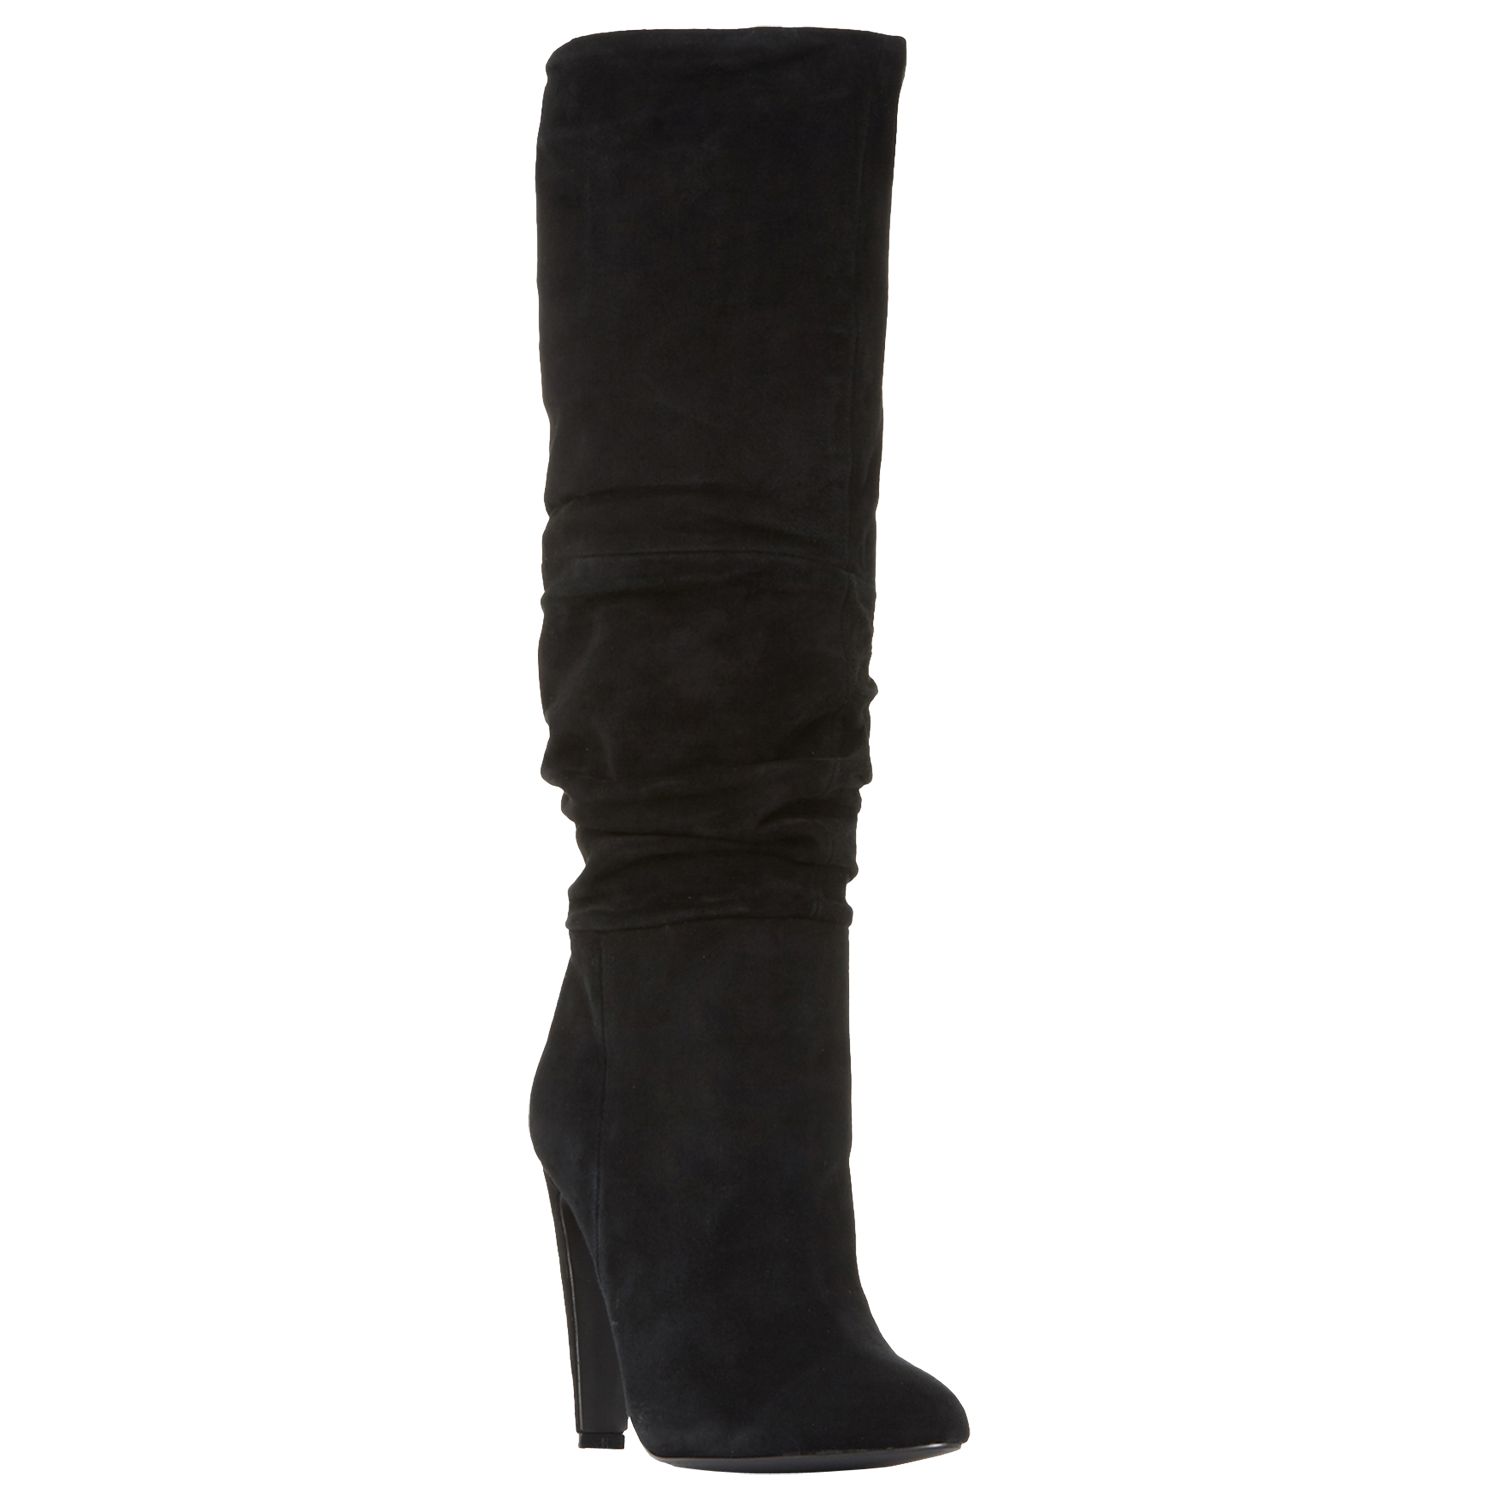 Steve Madden Carrie Ruched Knee High Boots, Black Suede at John Lewis